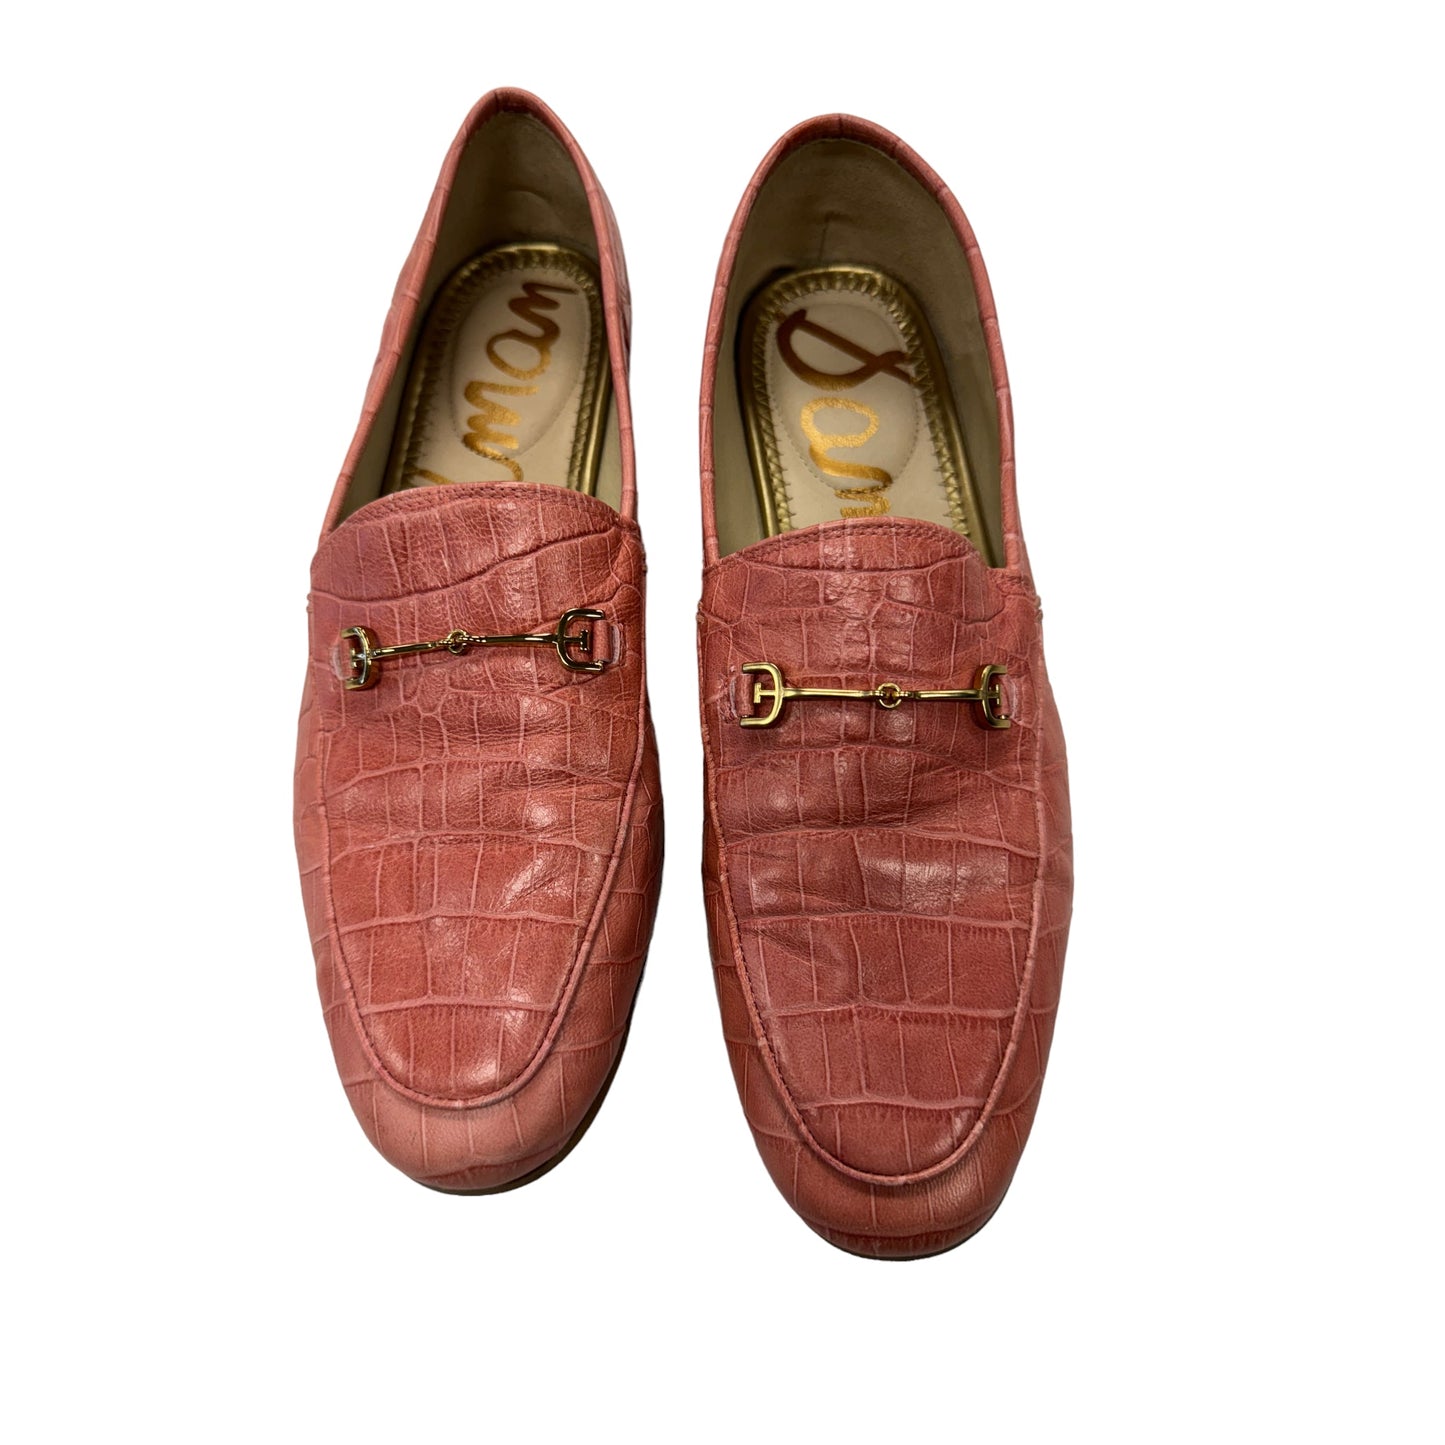 Shoes Flats Loafer Oxford By Sam Edelman  Size: 10